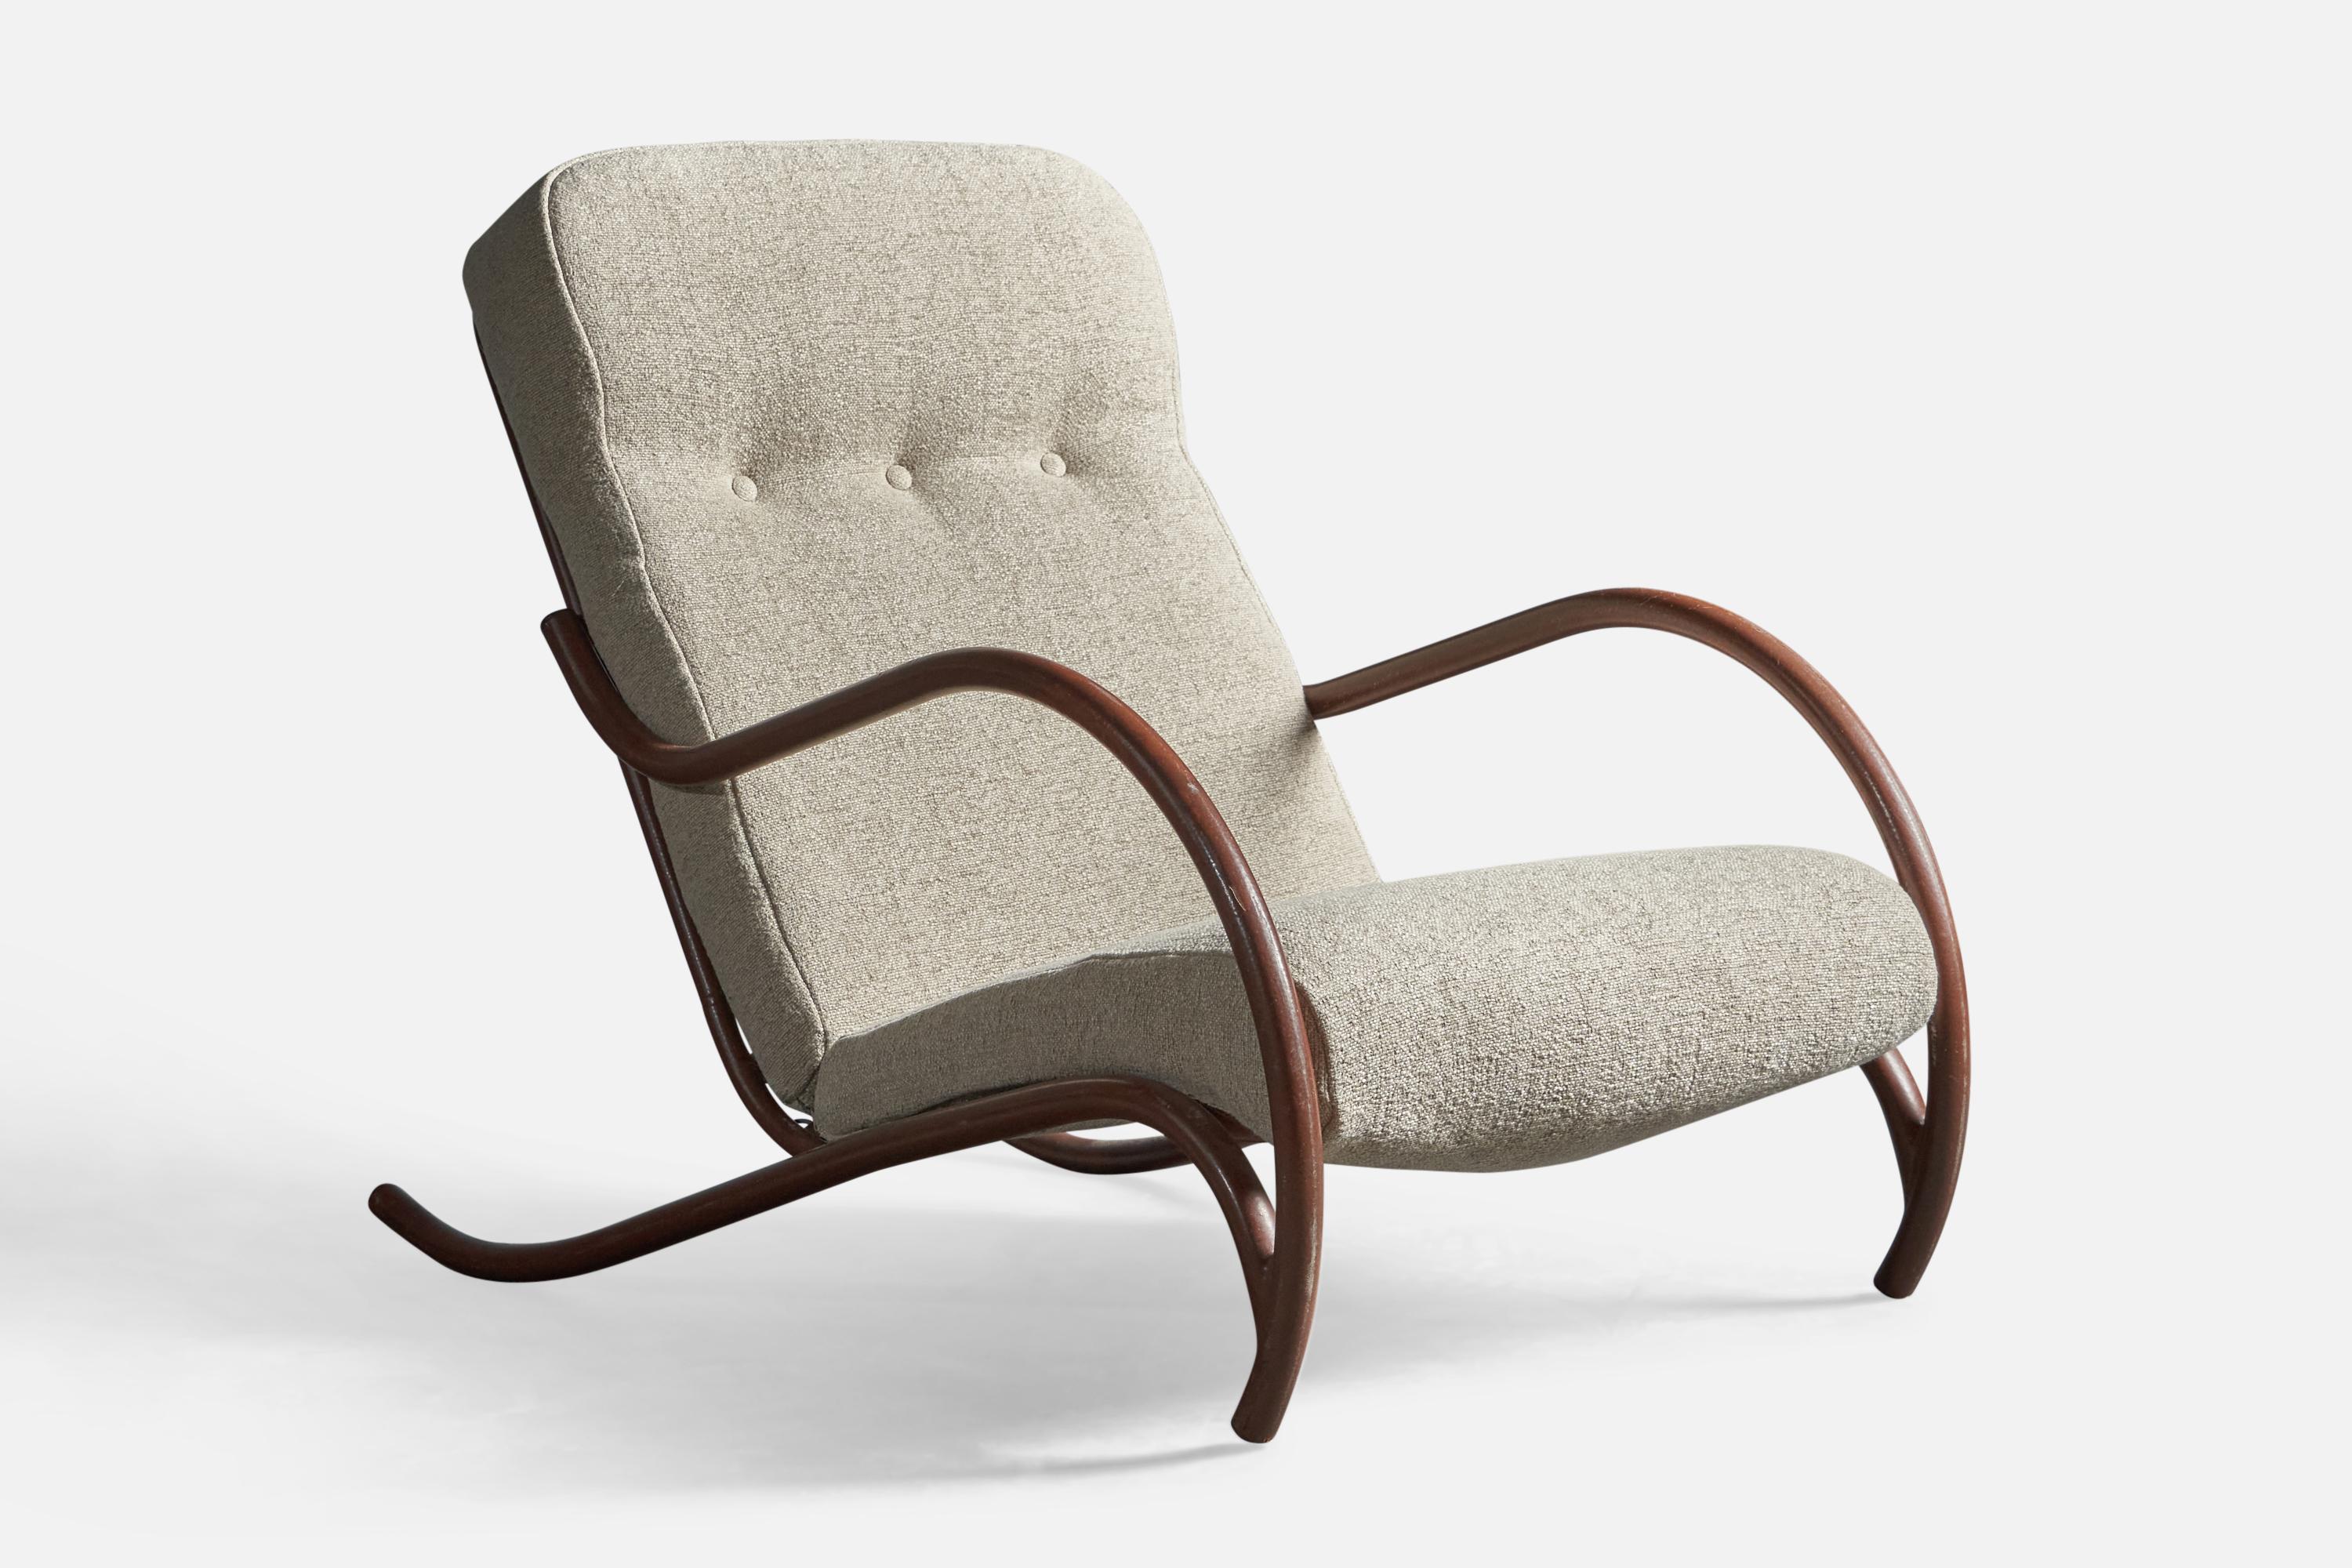 A tubular metal and fabric lounge chair, designed and produced in Sweden, c. 1930s.